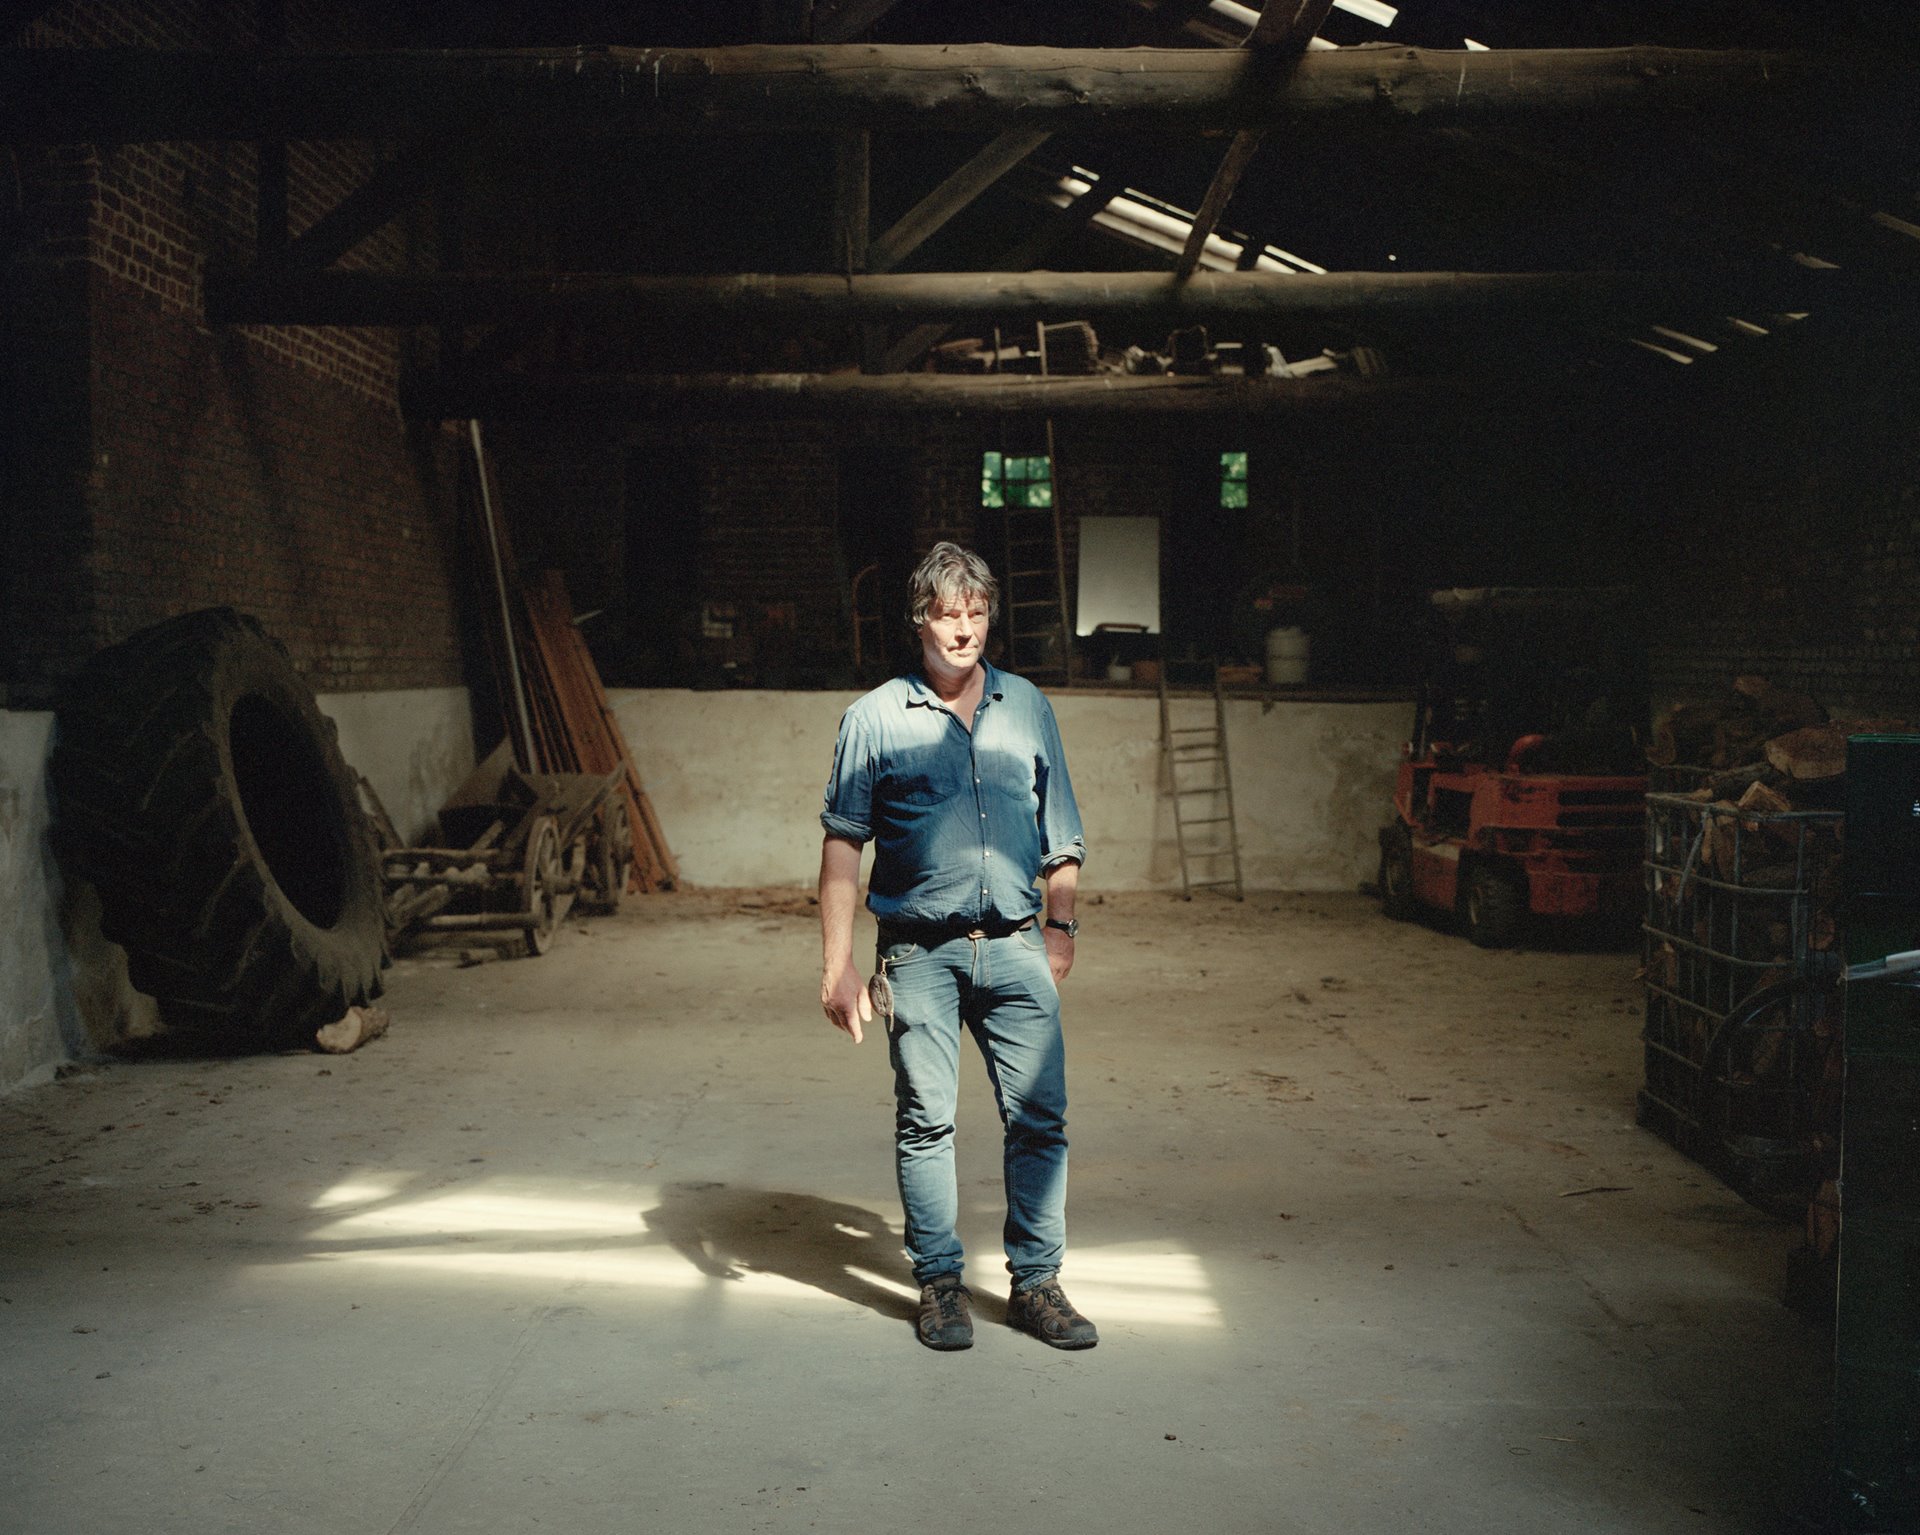 Eckardt Heukamp, the last remaining resident of Lützerath, Germany, stands for a portrait in his barn. In October 2022, he had to hand over his house to energy company RWE, which had already formally become the property of the company. Heukamp became well known for opposing the demolition of his village and letting activists live on his property there.